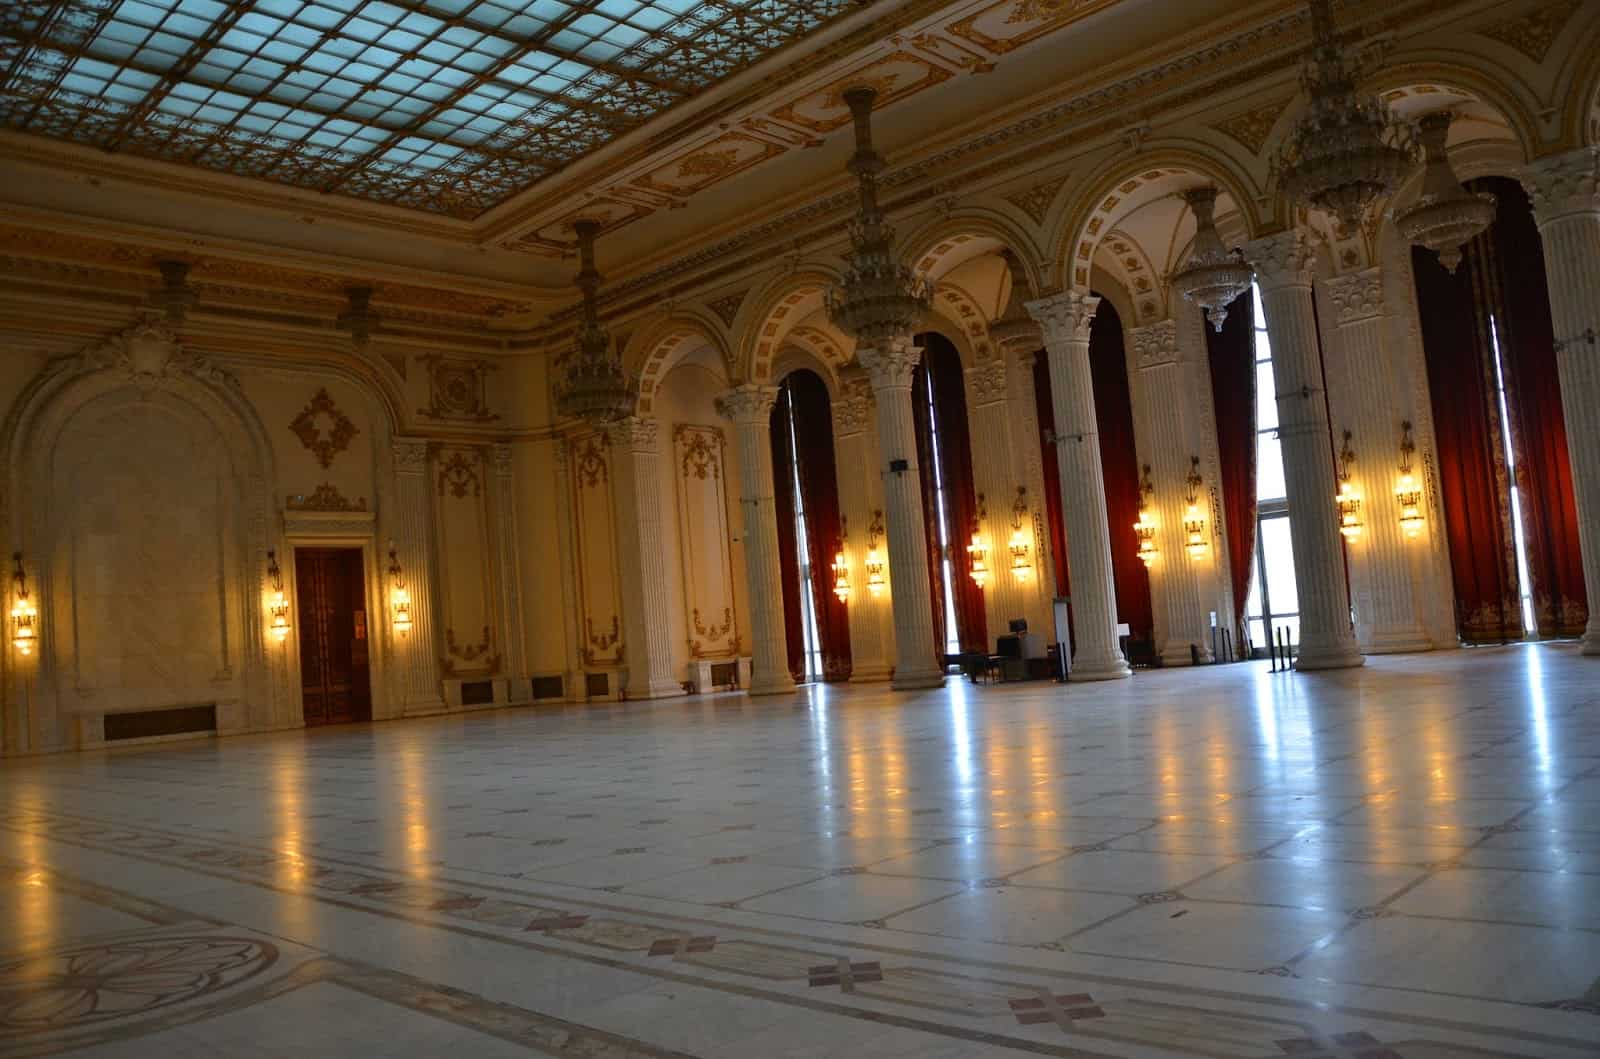 Unification Hall at Palace of Parliament in Bucharest, Romania